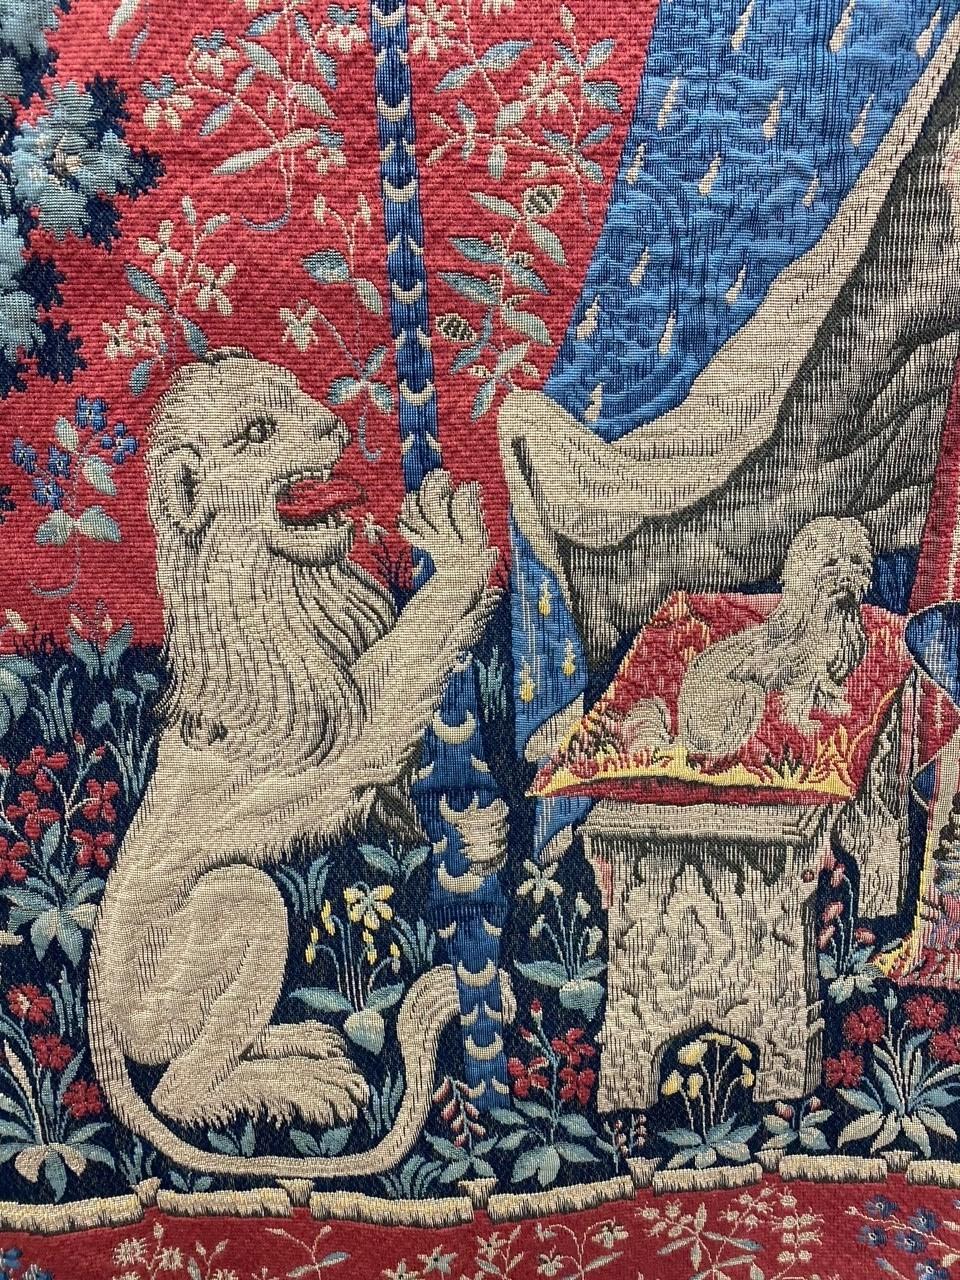 Jacquard woven with relief stitch. Fully lined with rod pocket for hanging.
65% wool with/cotton/rayon/polyester. 
Also available in size 67x77 ( $1,499.00).  Please message for more information.
All measurements are approximate.

This tapestry is